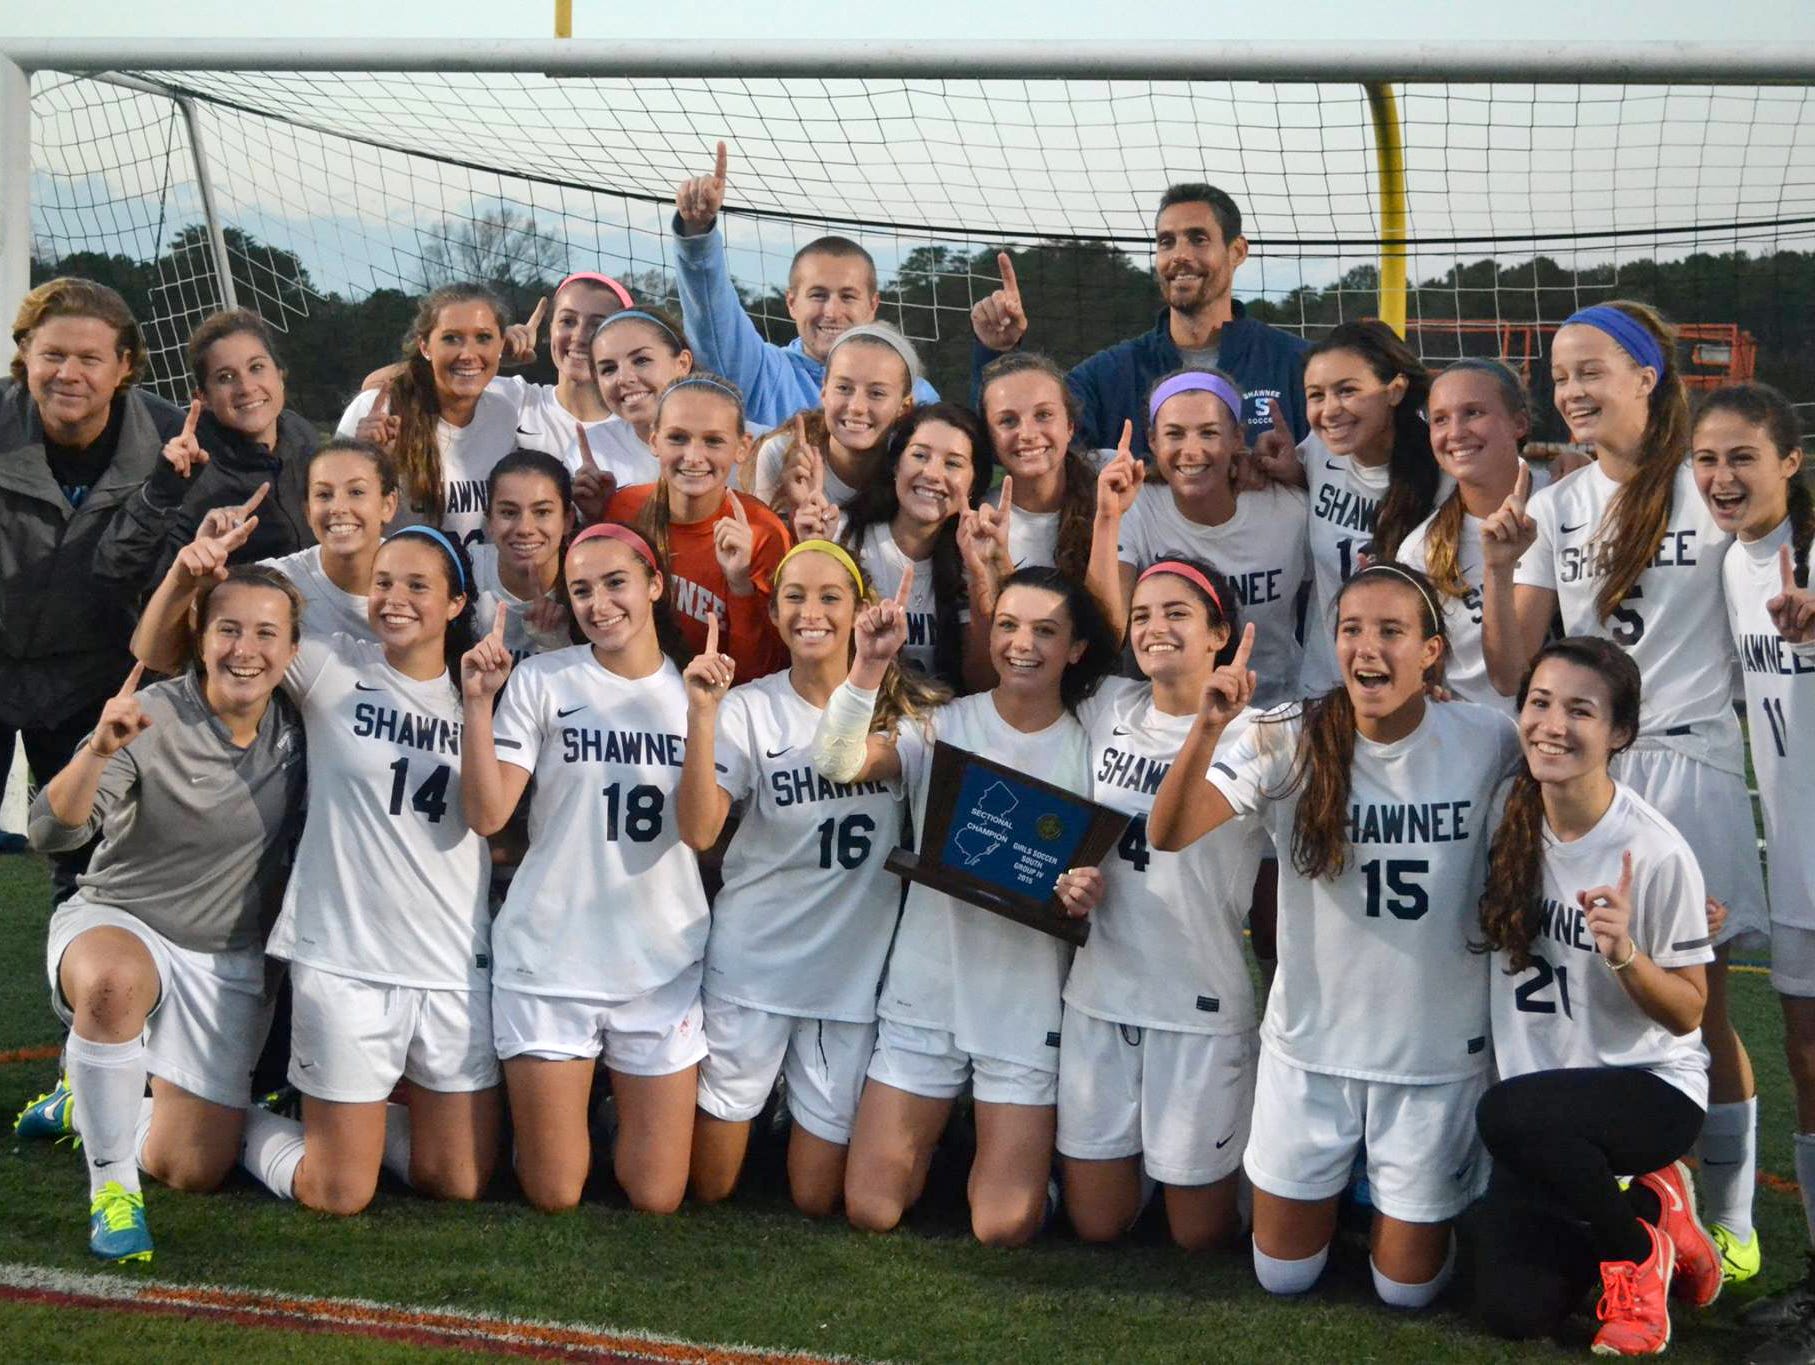 The Shawnee High School girls' soccer team claimed the South Jersey Group 4 title and is the Courier-Post Team of the Year.